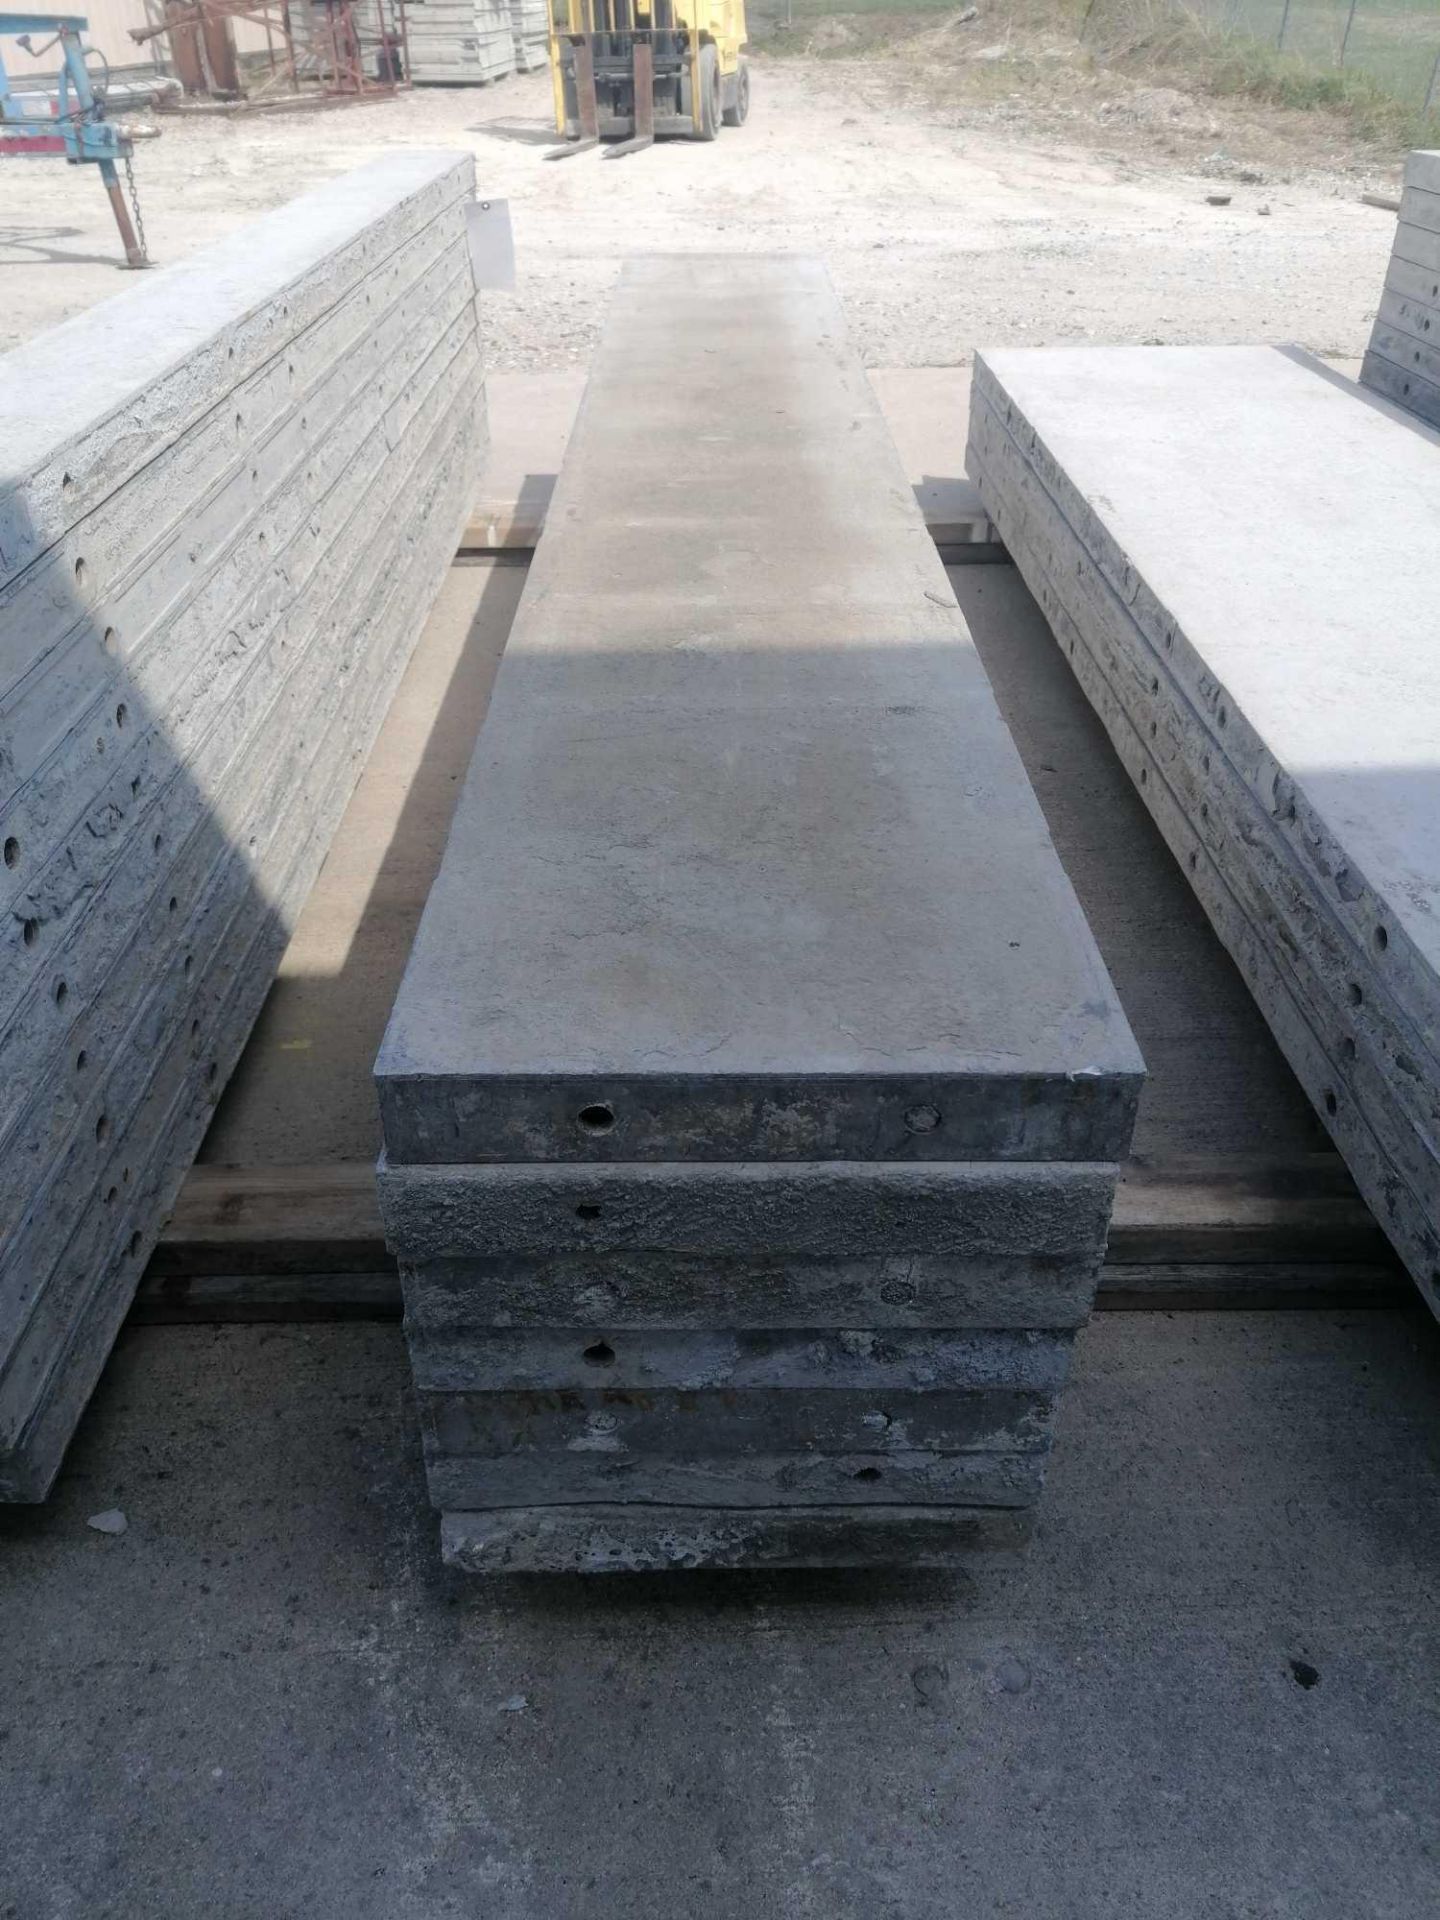 (7) 14" x 8' Durand Aluminum Concrete Forms, Smooth 8" Hole Pattern. Located at 301 E Henry - Image 2 of 3